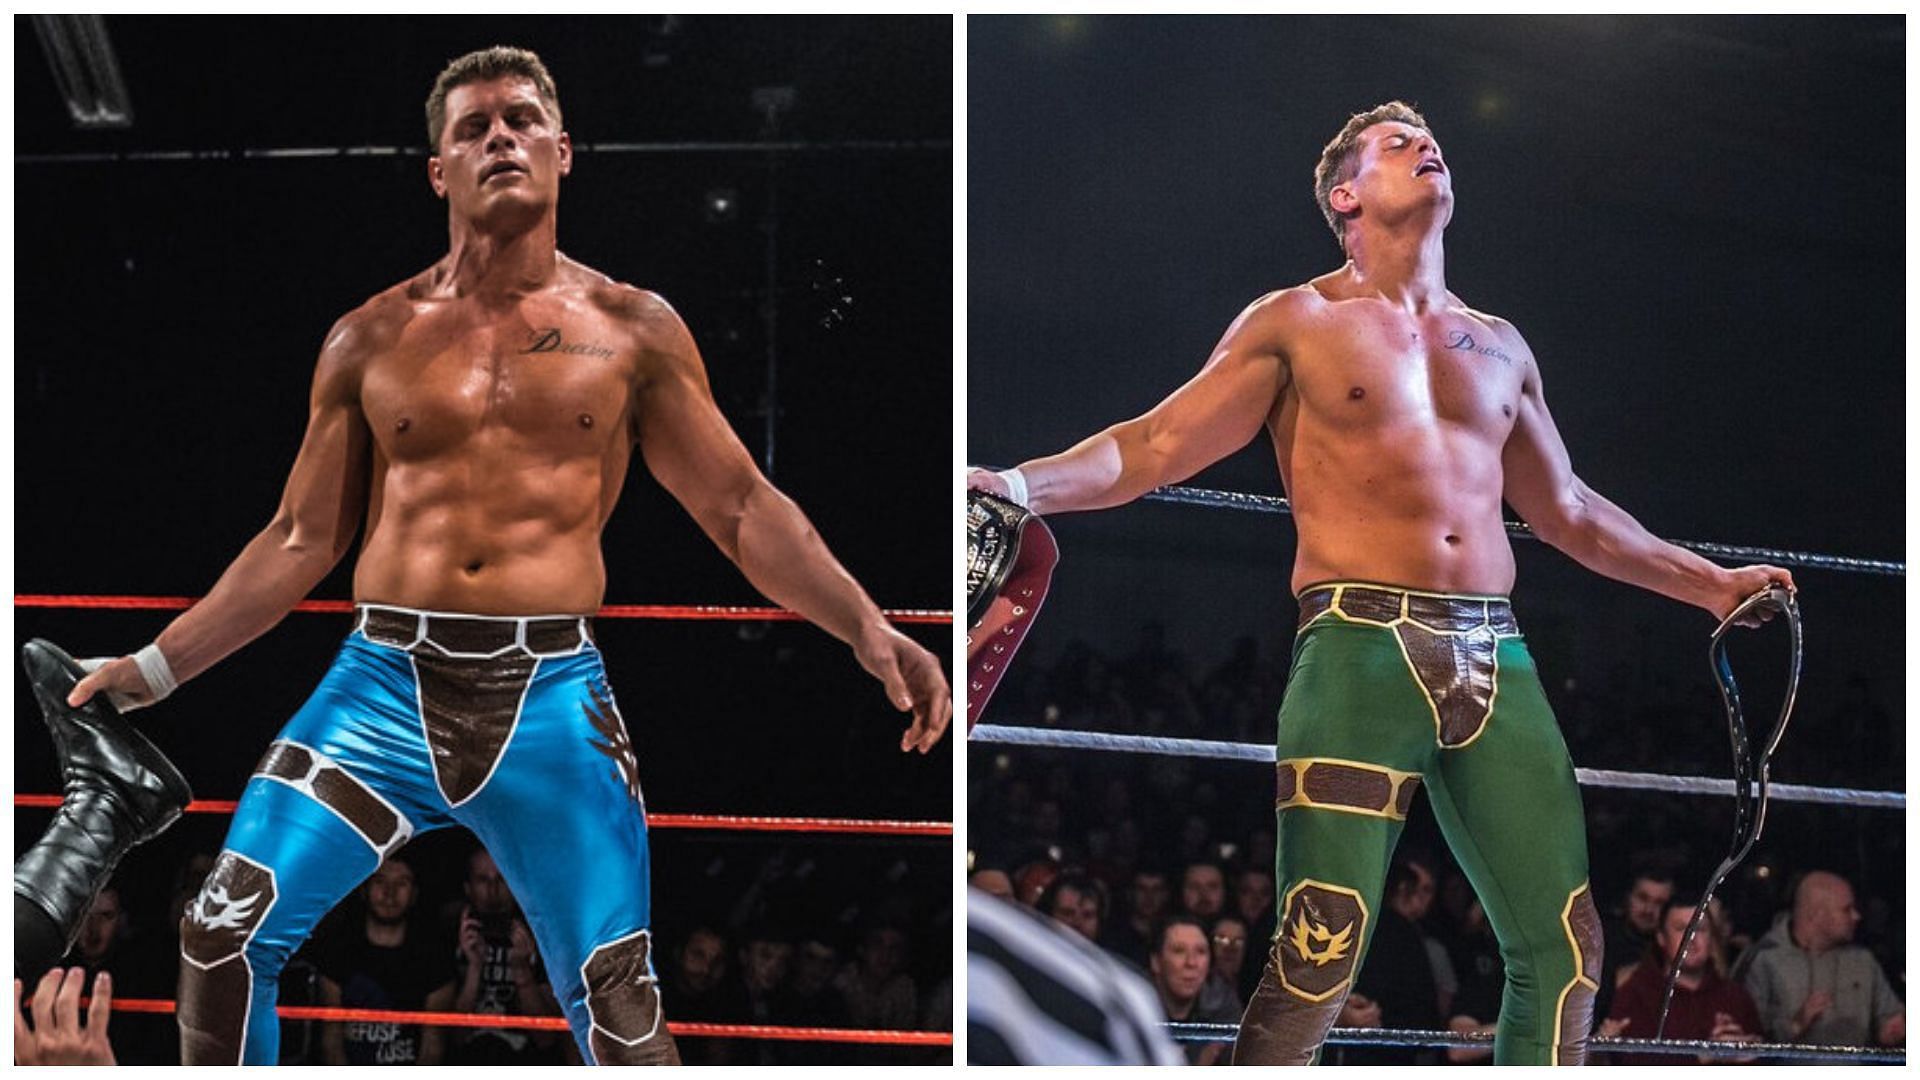 Cody Rhodes during his time away from WWE.